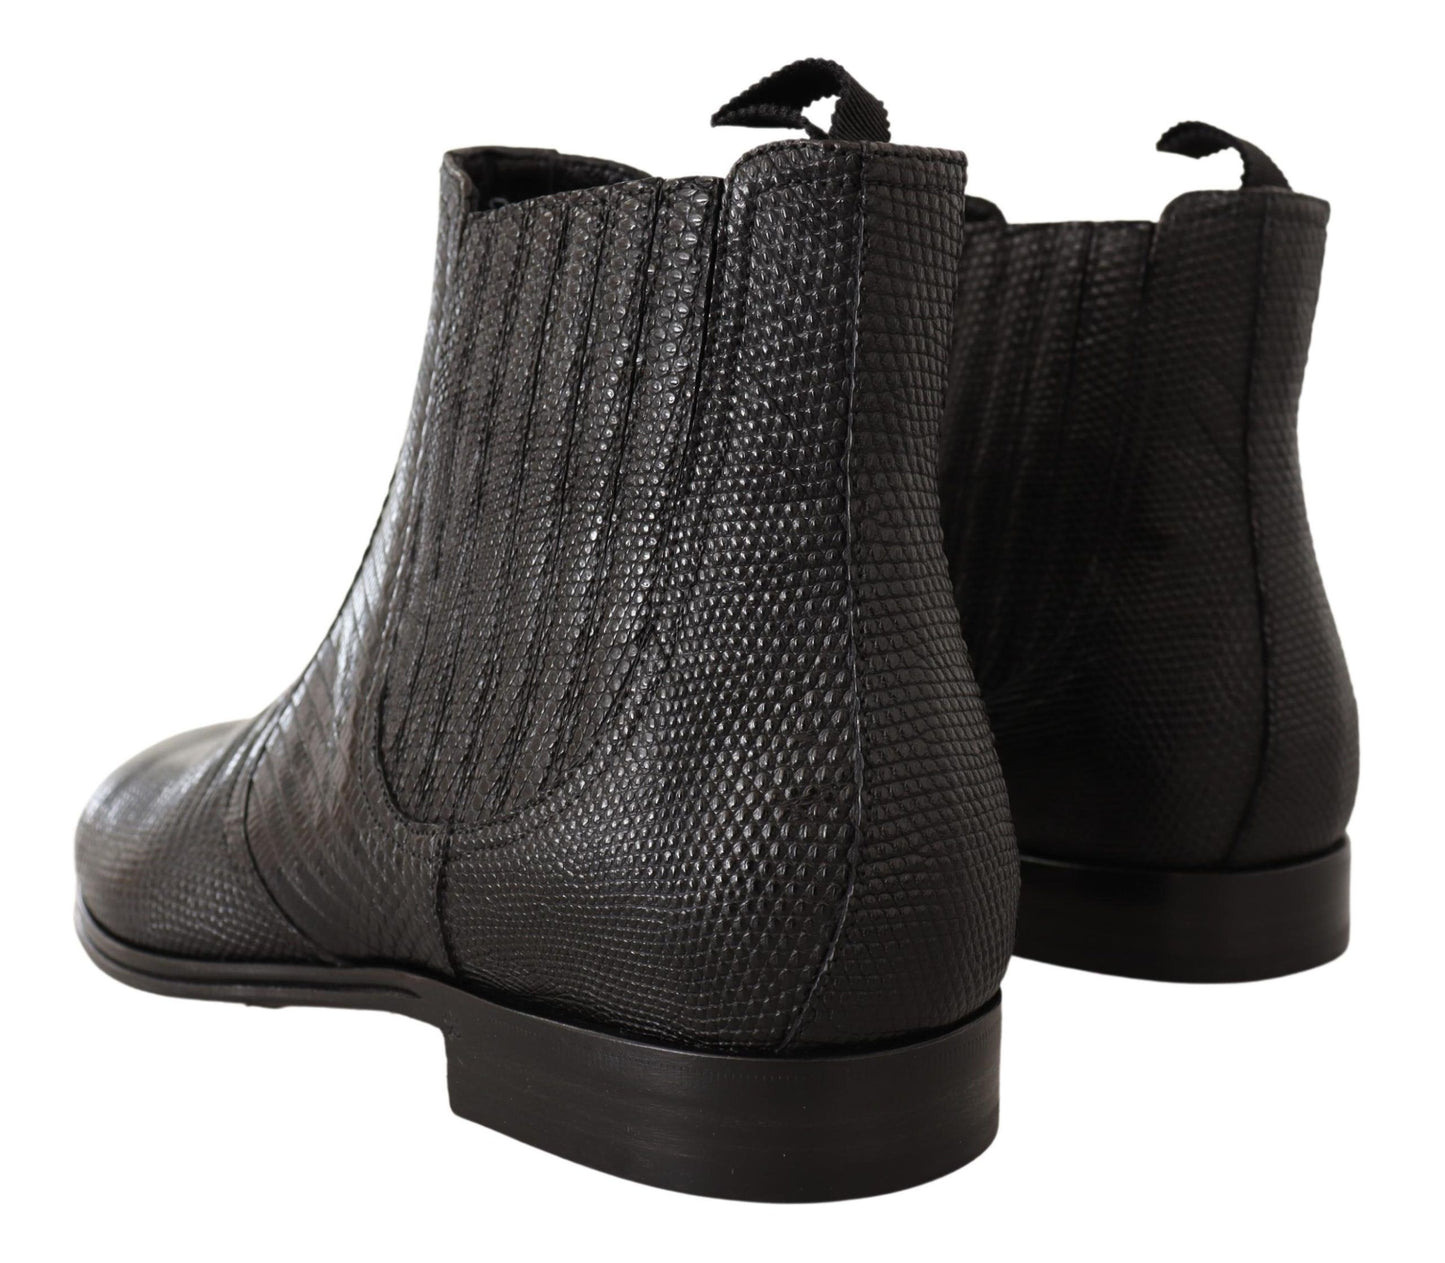 Black Leather Lizard Skin Ankle Boots